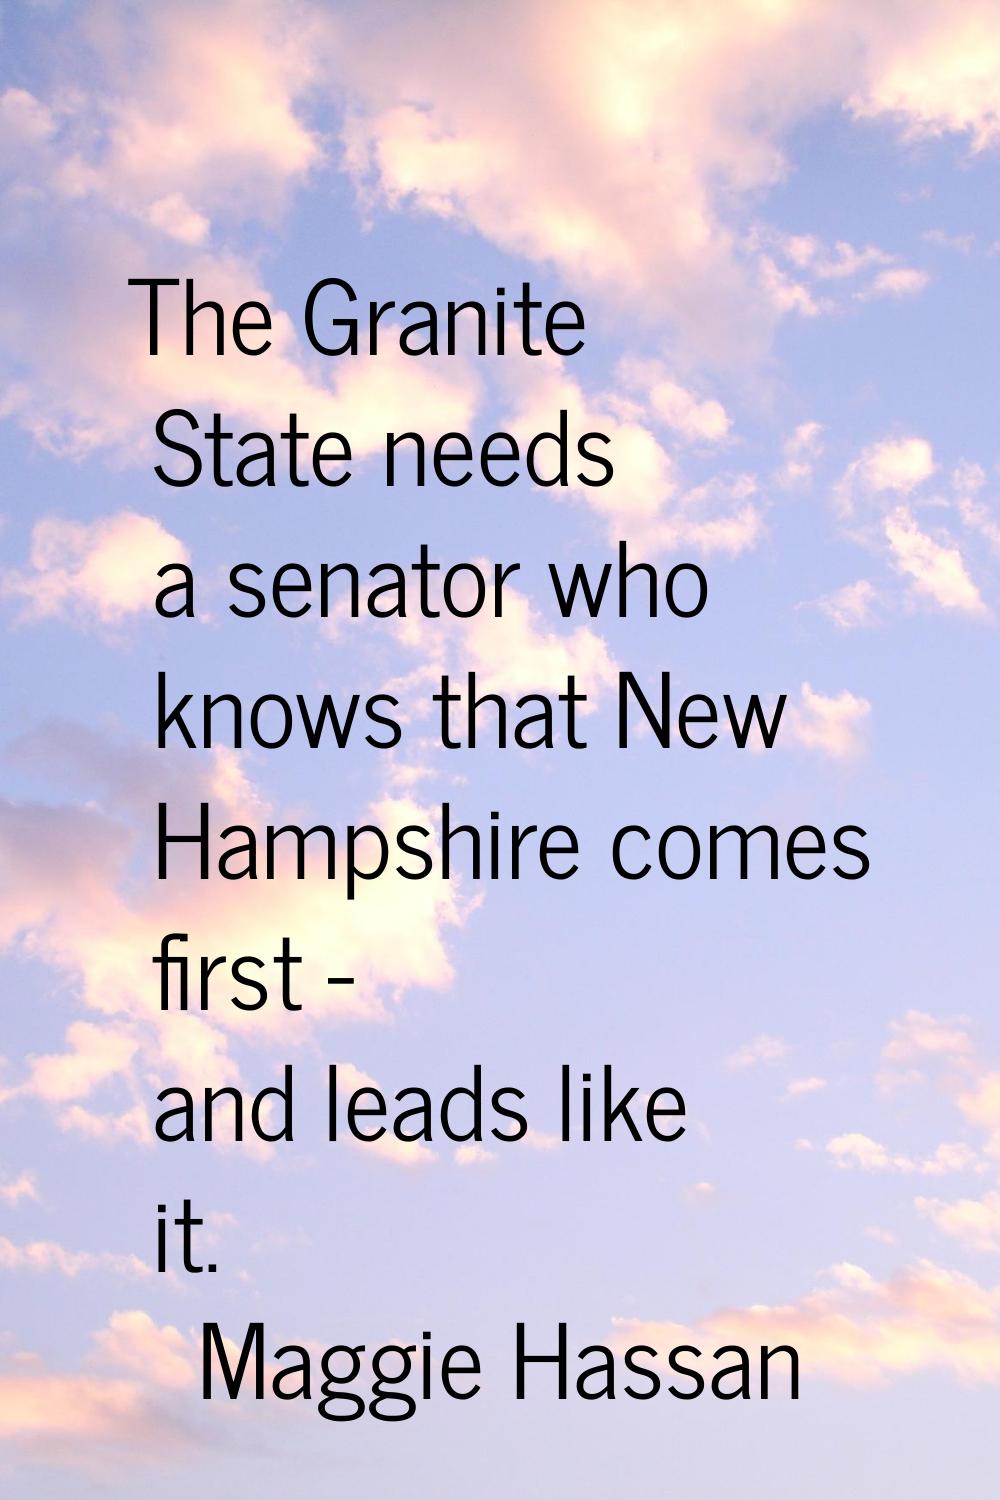 The Granite State needs a senator who knows that New Hampshire comes first - and leads like it.